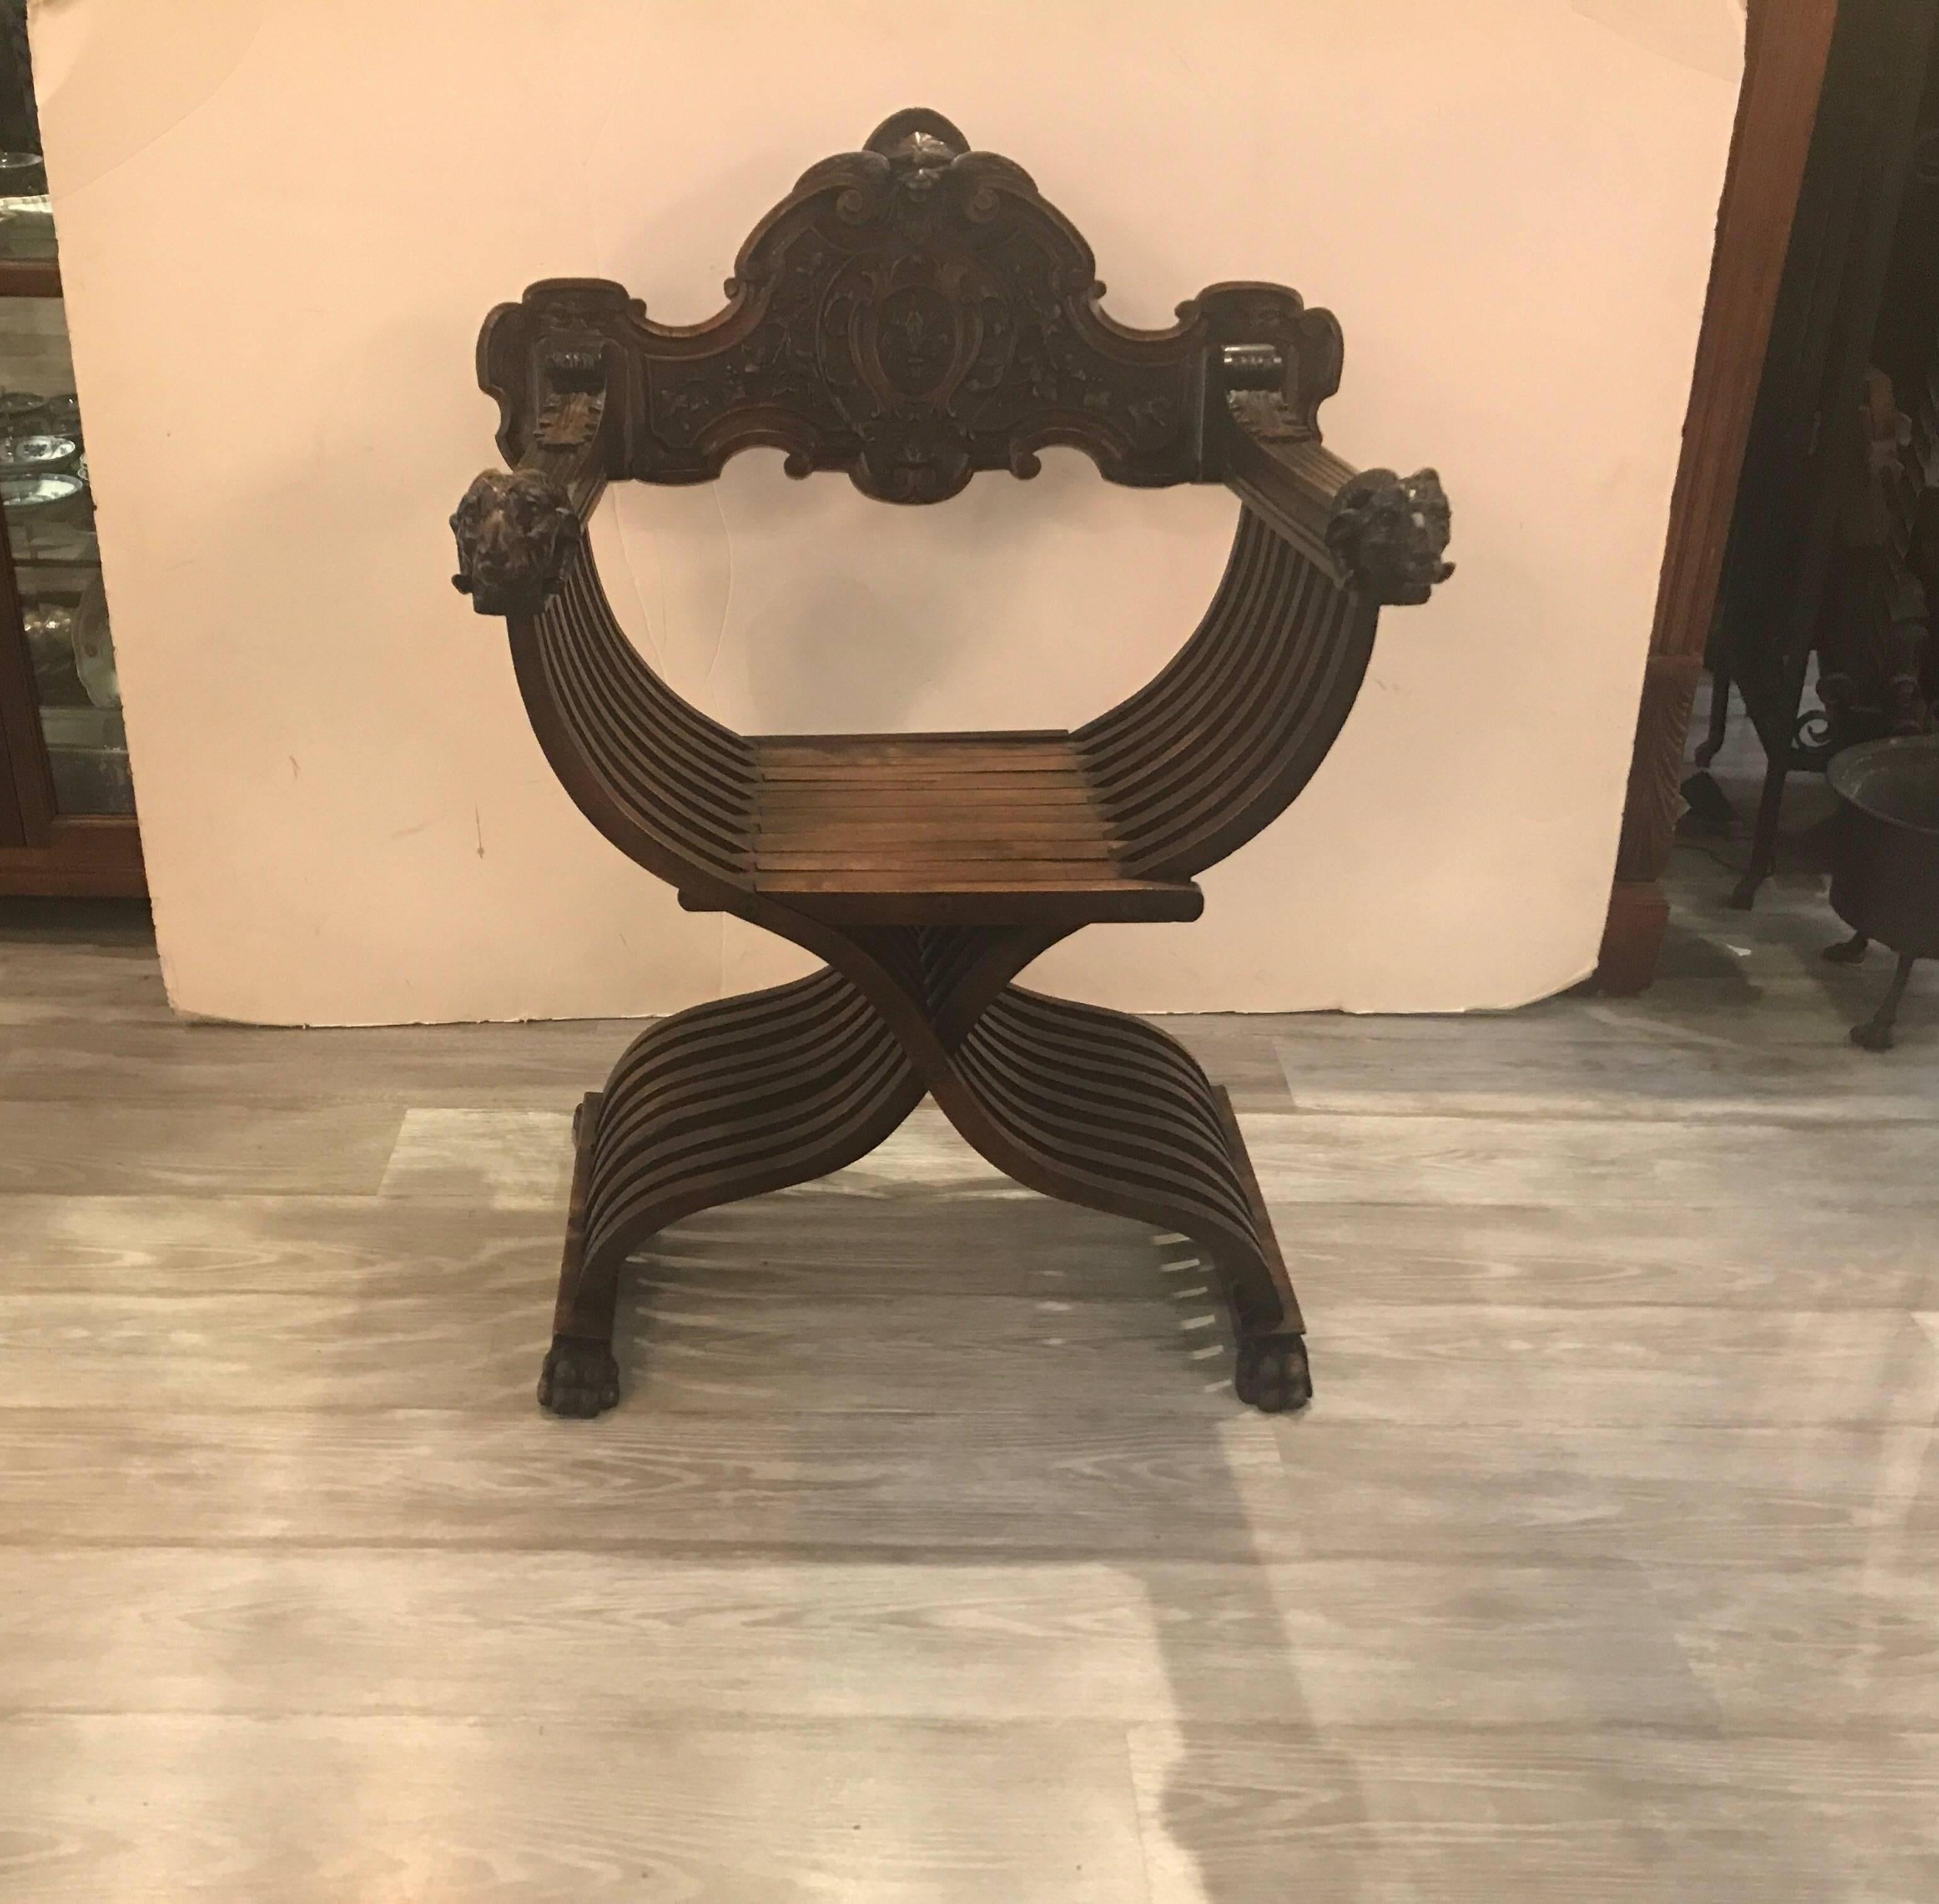 Hand carved walnut Savonarola chair. The rich walnut with warm aged patination and original well carved for finish. The carving on this example is exception with the highly detailed back and ram's head on the arms.
Developed in the late 15th